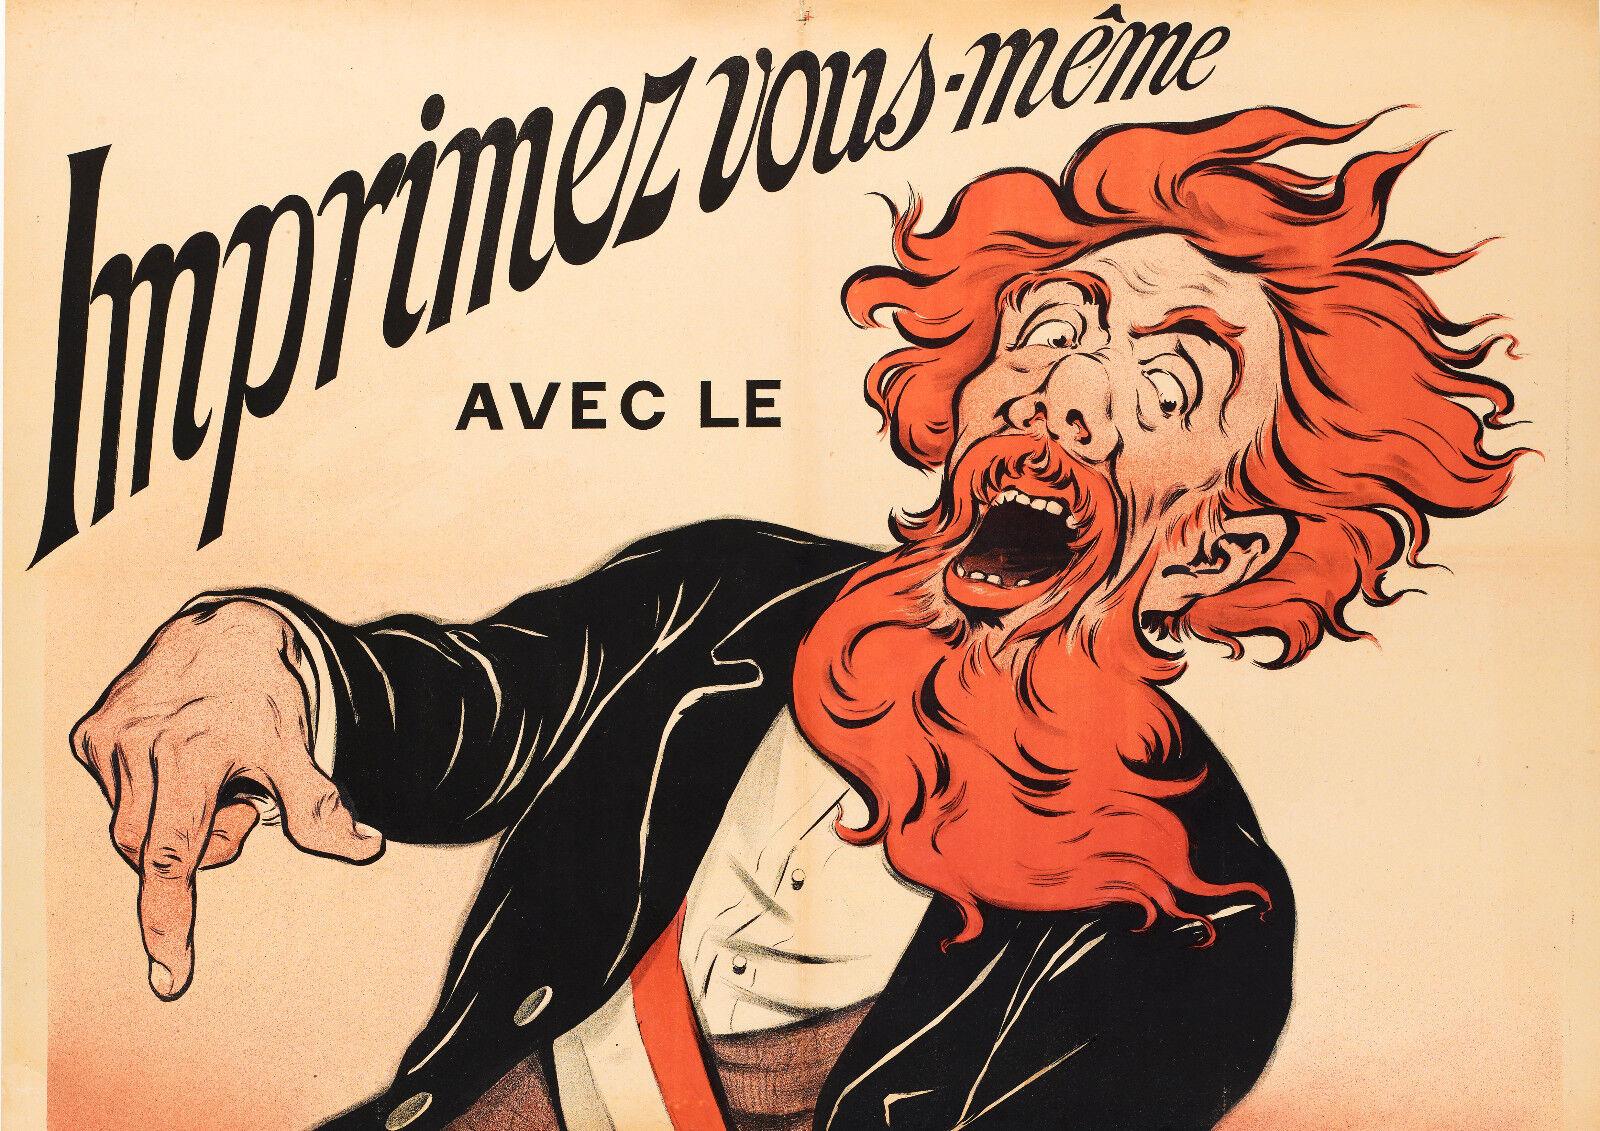 Original Vintage poster-Eugene Ogé-Gestetner Printing Company, 1898

This red haired and bearded member of parliament (representative) is Camille Pelletan, was elected in 1898 president of the Radical-Socialist group in Parliament. He was Minister